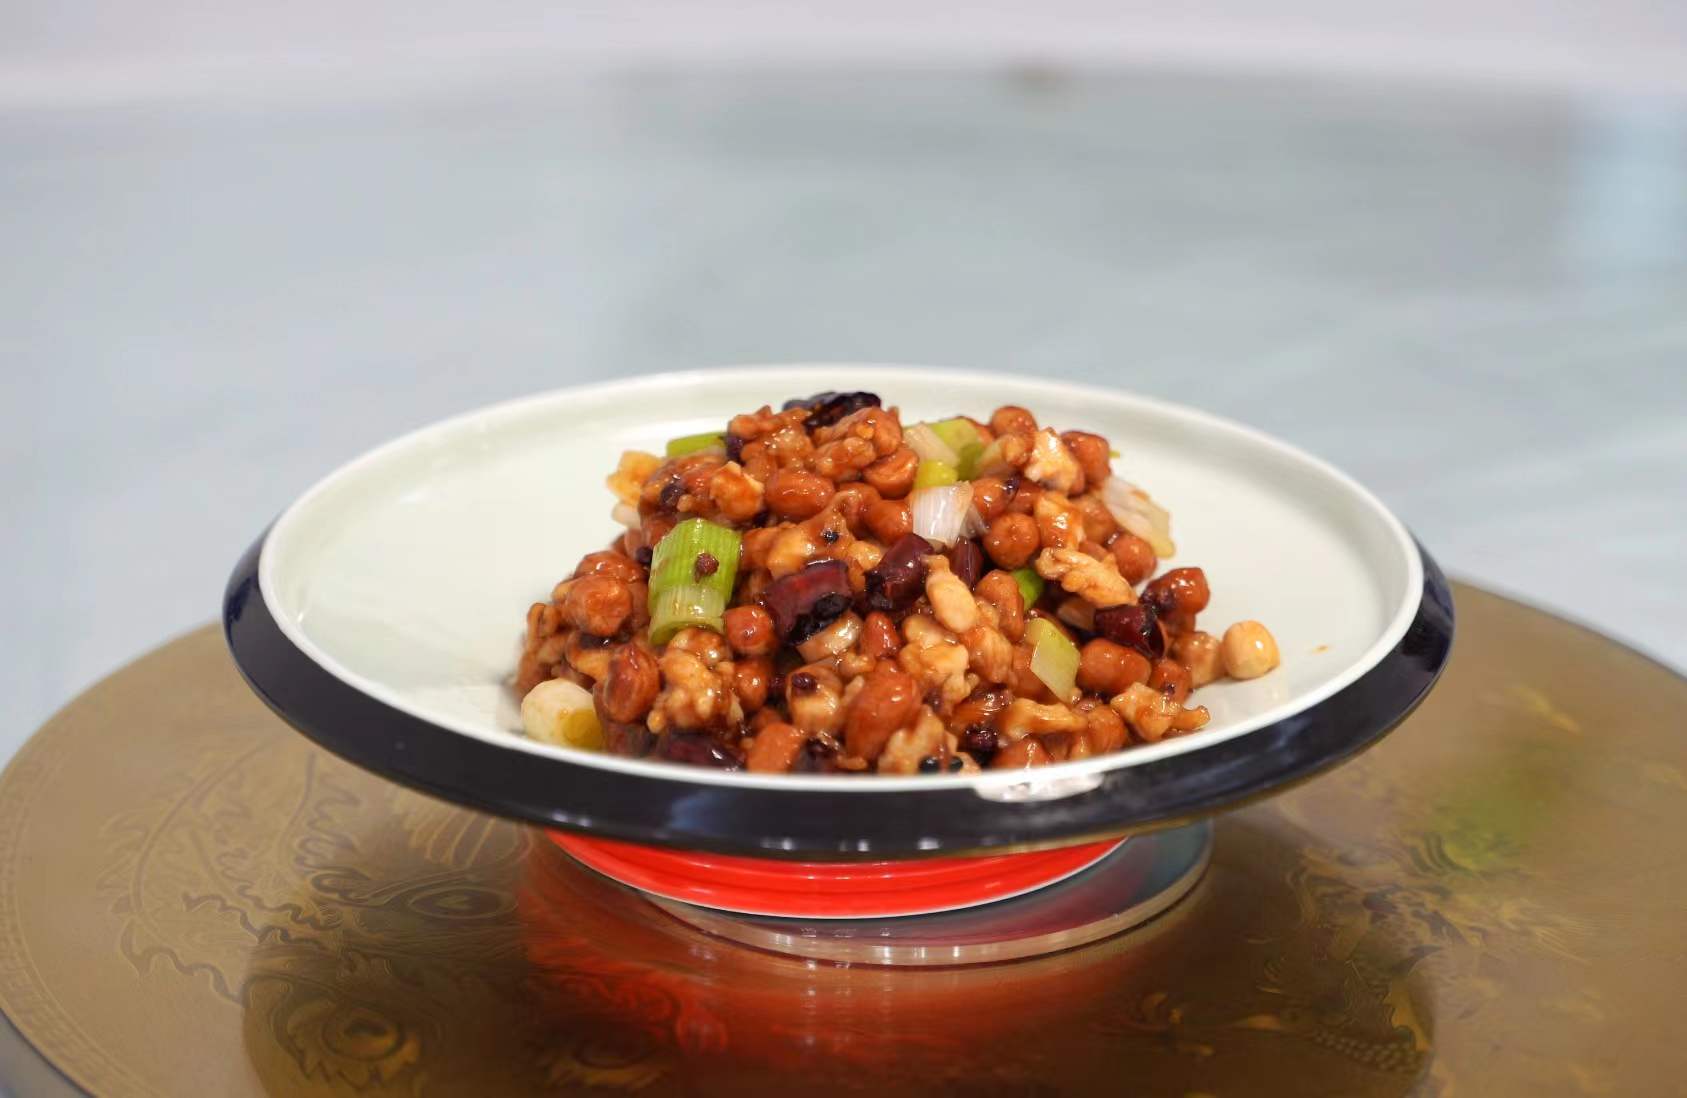 How to cook Kung Pao Chicken